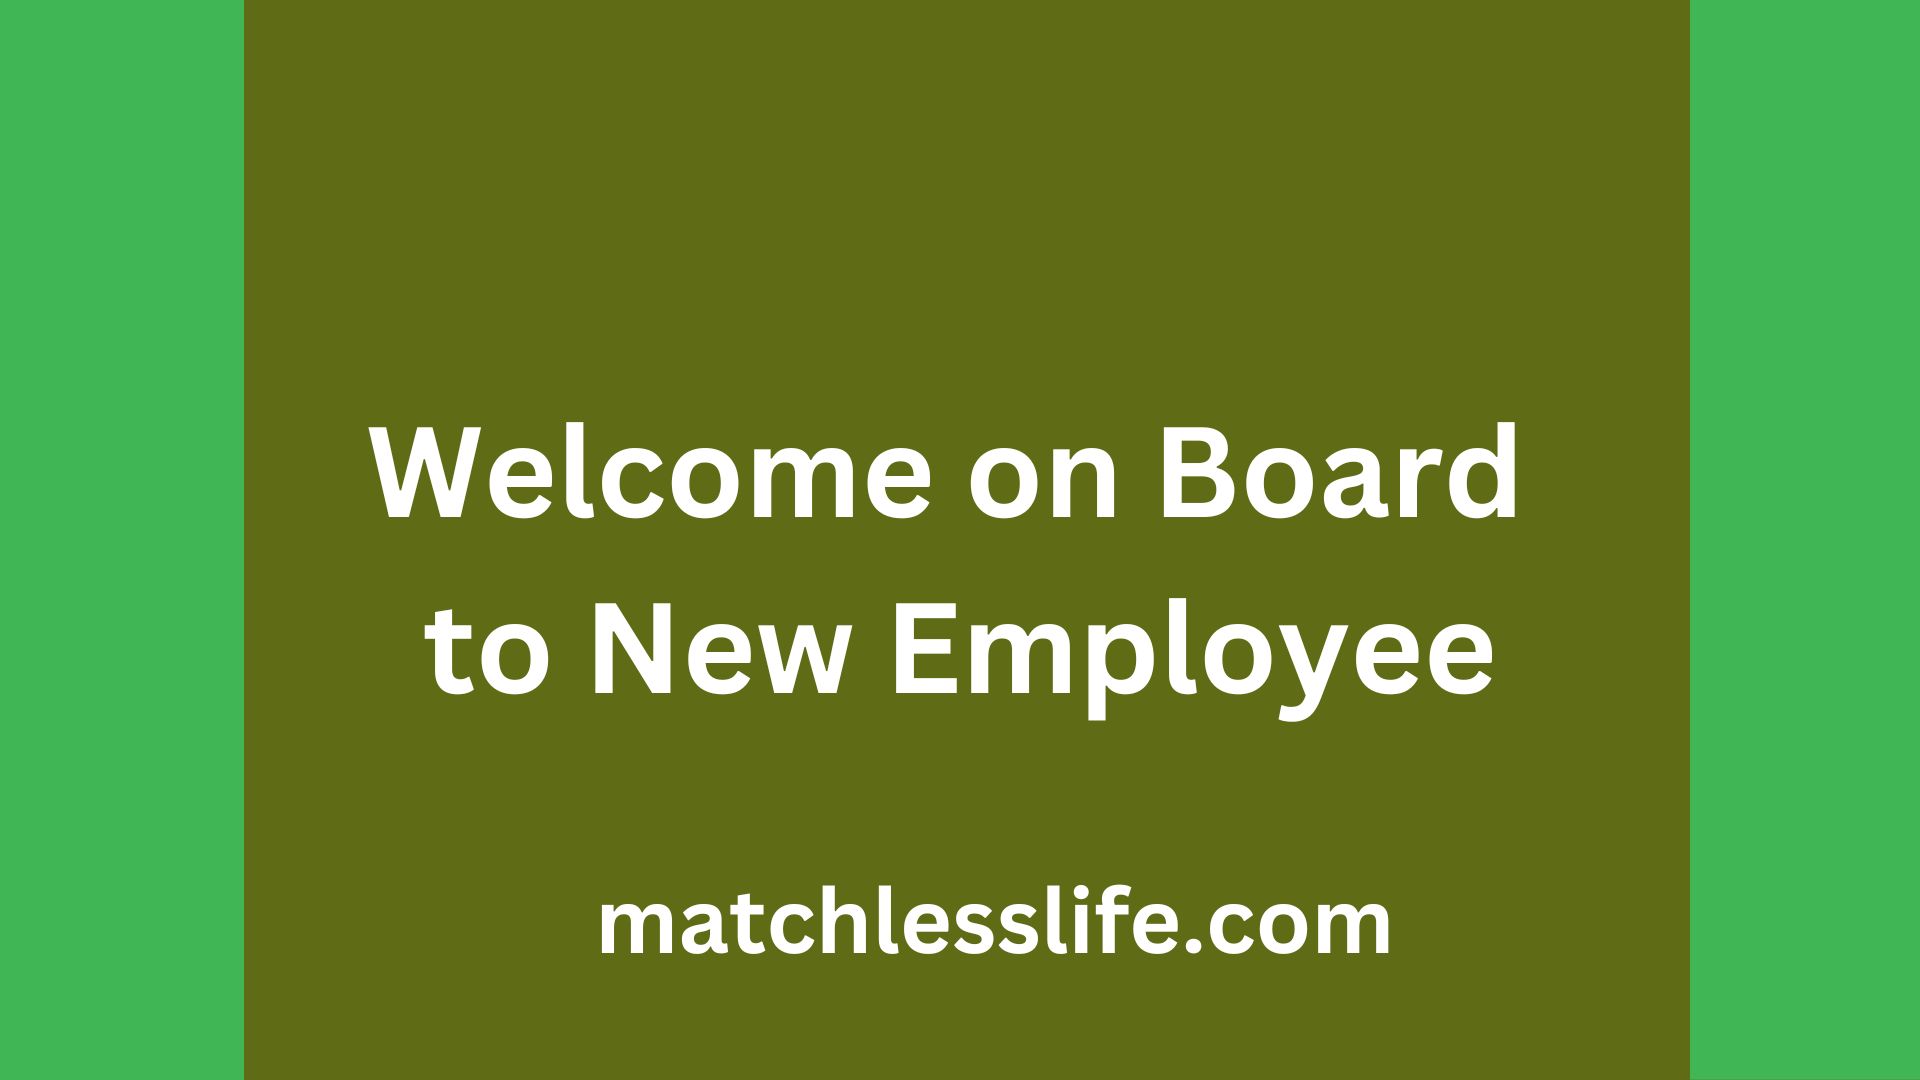 Welcome on Board to New Employee